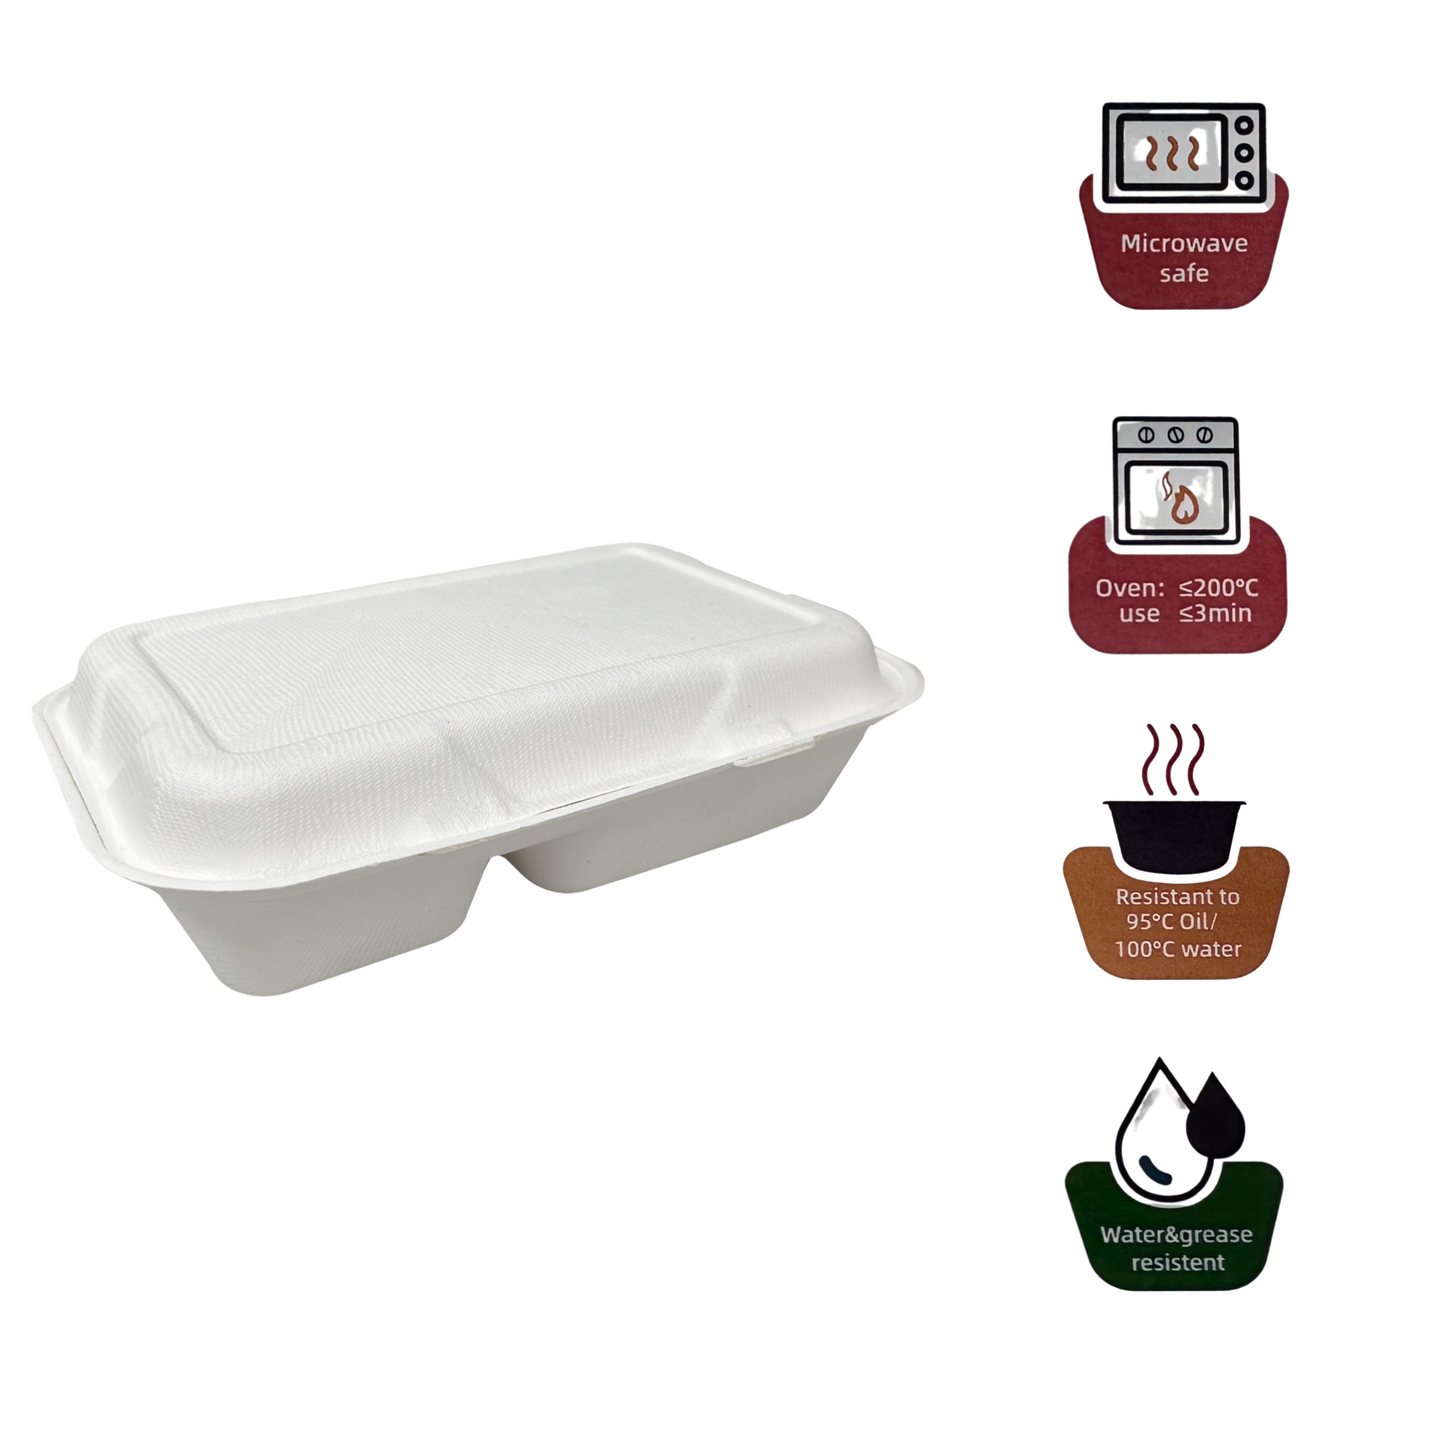 250 Pcs, 9x6x3'', 2-Compartment, Sugarcane Clamshell Food Container